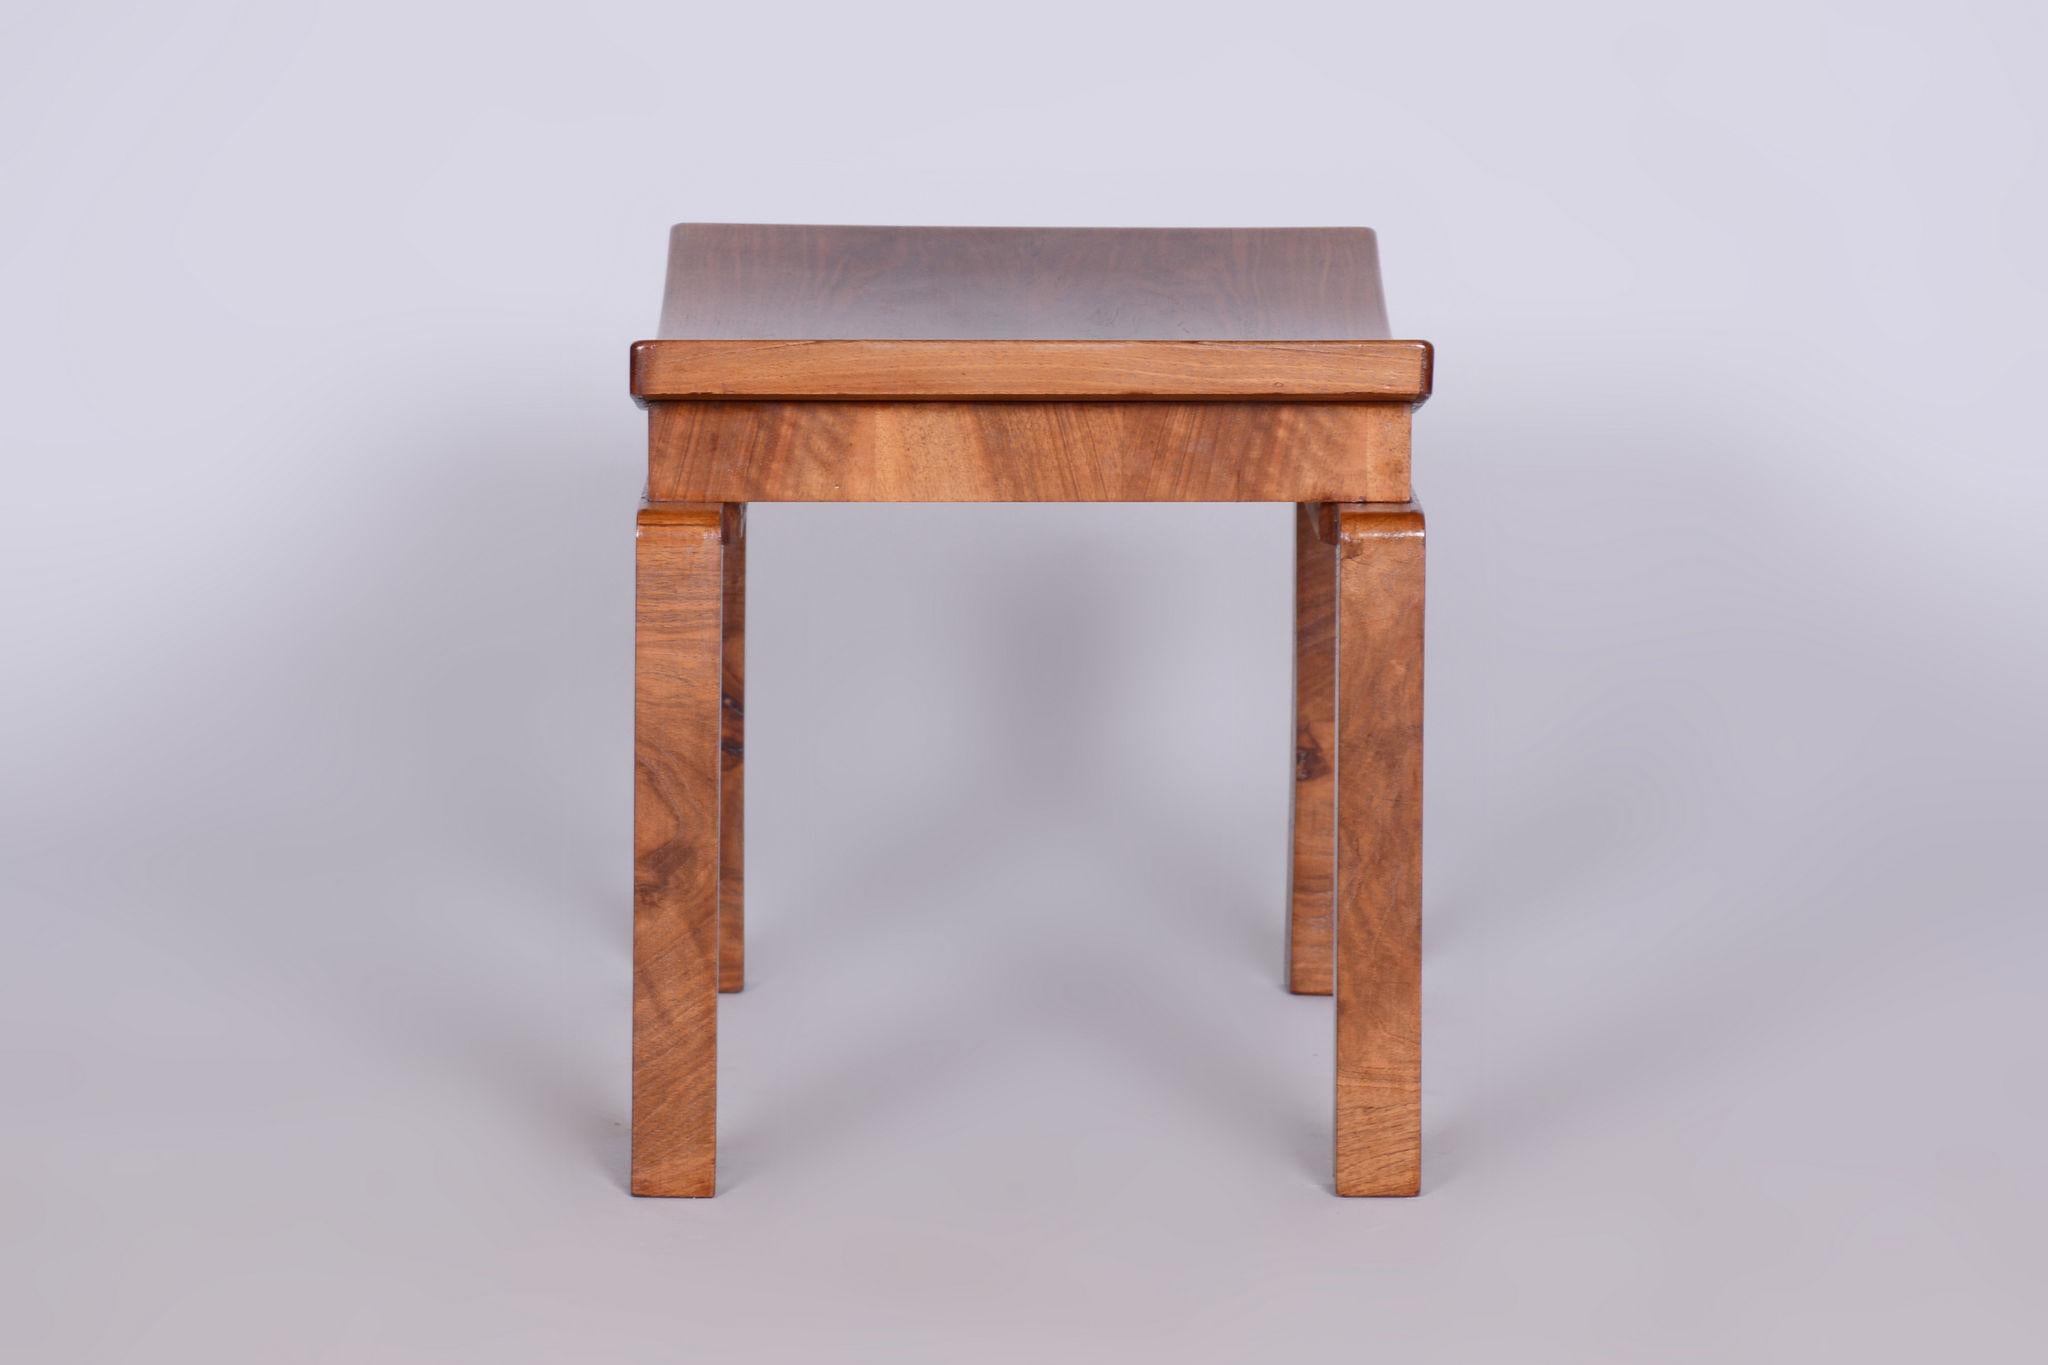 Restored Walnut ArtDeco Stool. Revived Polish.

Source: Czechia
Period: 1920-1929
Material: Walnut

Our professional refurbishing team in Czechia has fully restored it according to the original process. 

This item features classic Art Deco